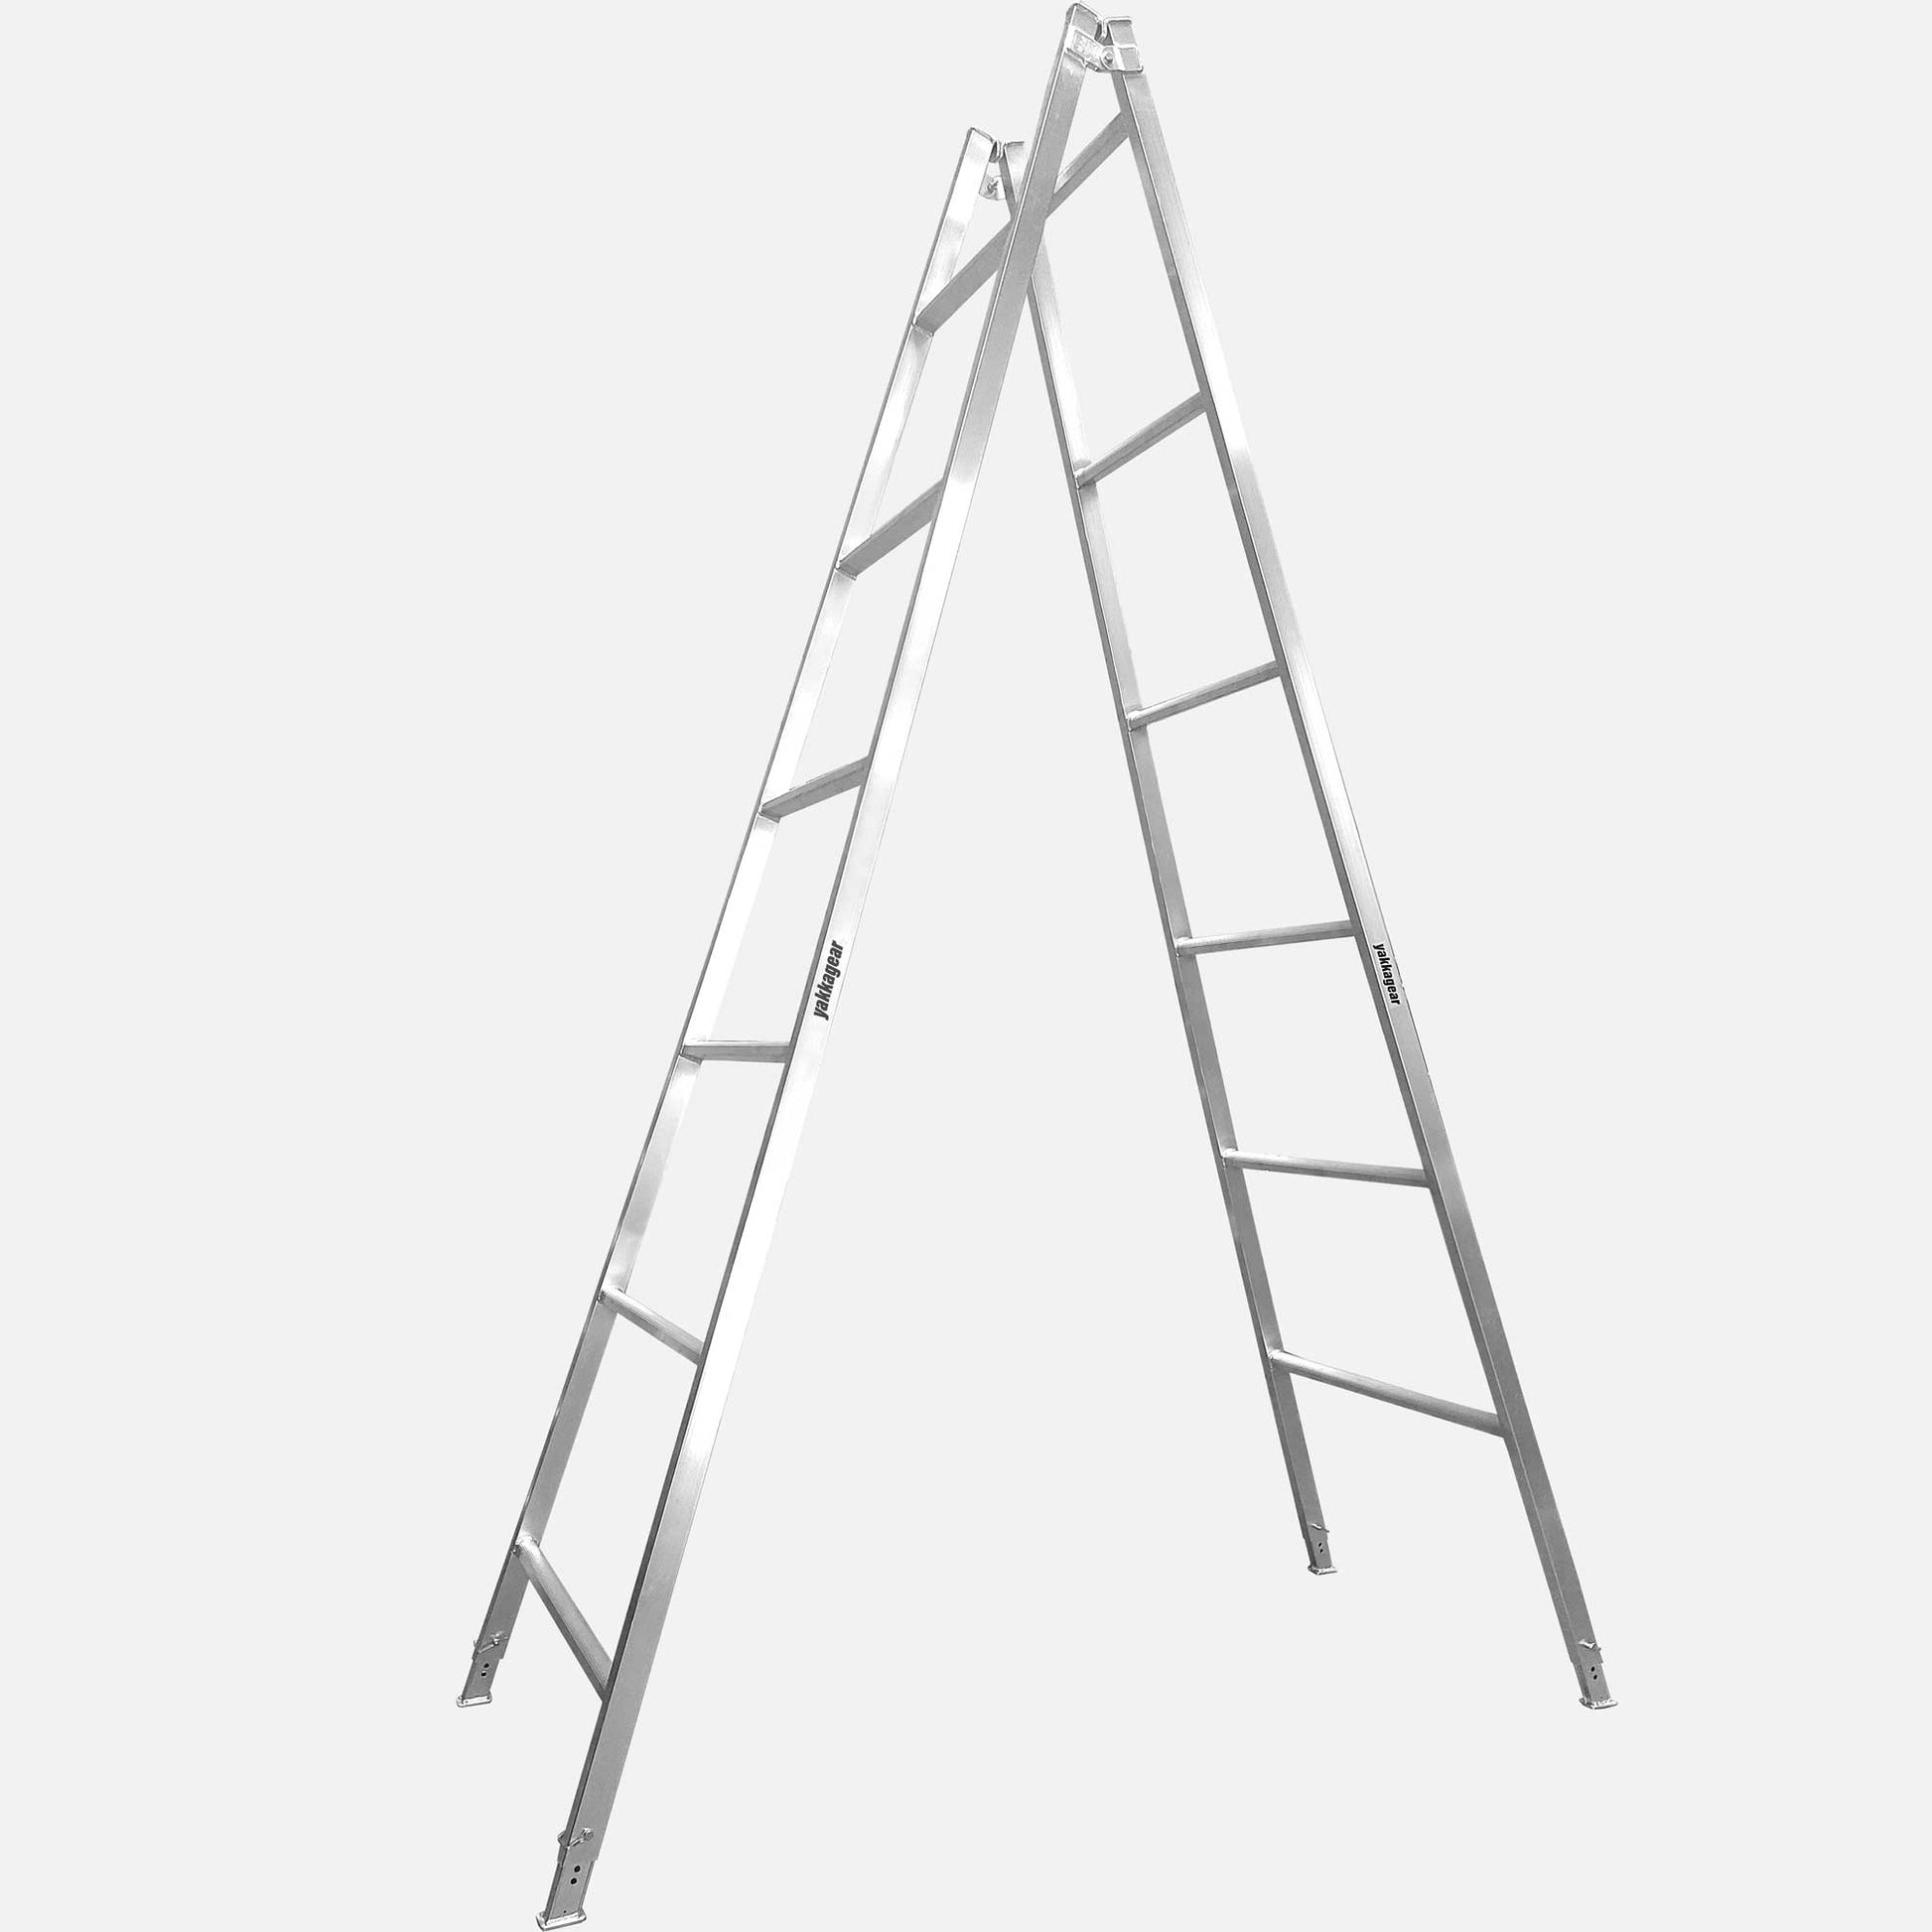 3.6m to 3.9m Adjustable Aluminium A-Frame Trestle Ladders from Yakka Gear, view from the side.